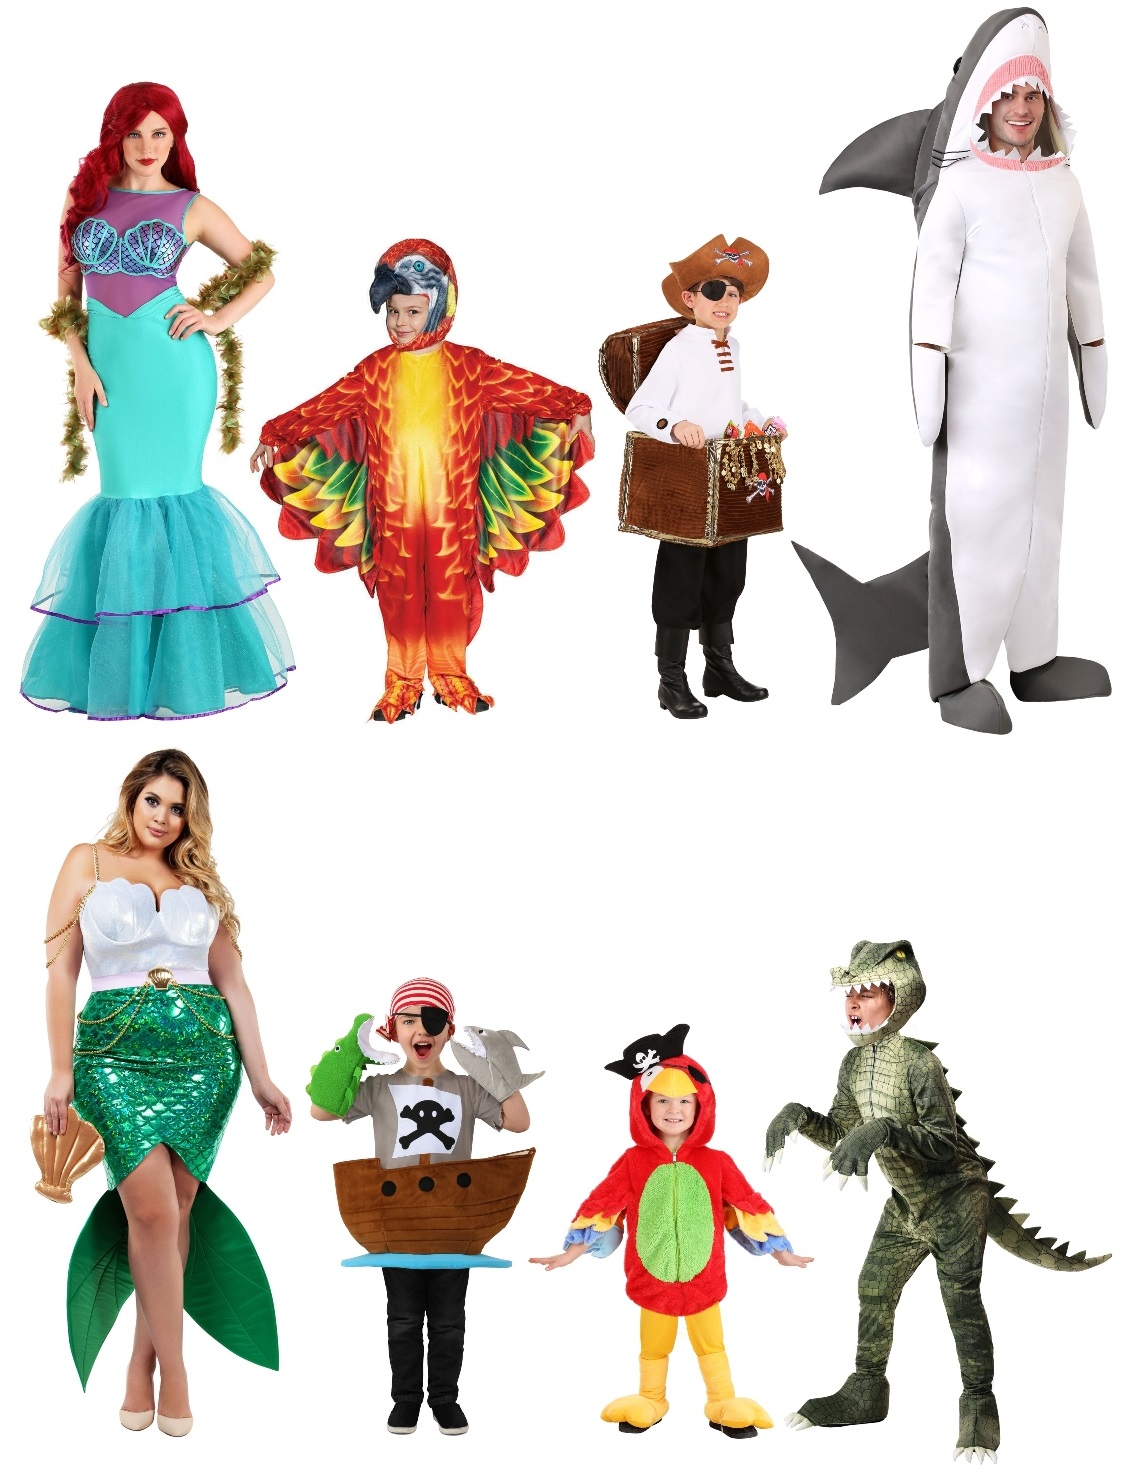 Pirate Costumes for All Ages [Costume Guide] - HalloweenCostumes